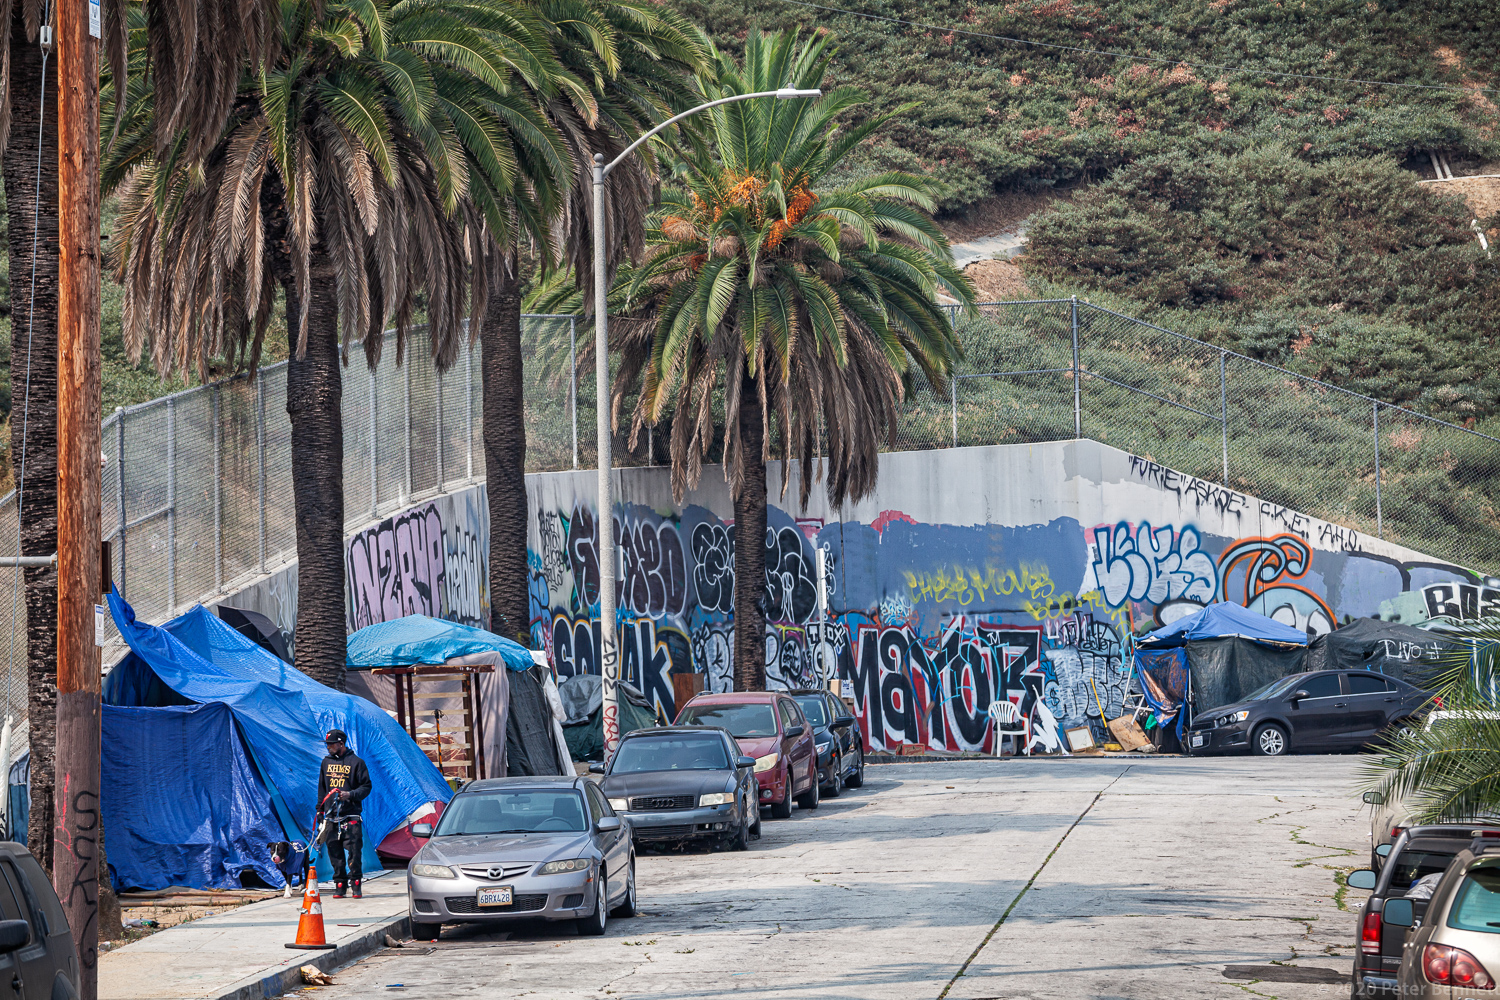 An encampment for people experiencing homelessness along Emerald Street in the Vista Hermosa neighborhood